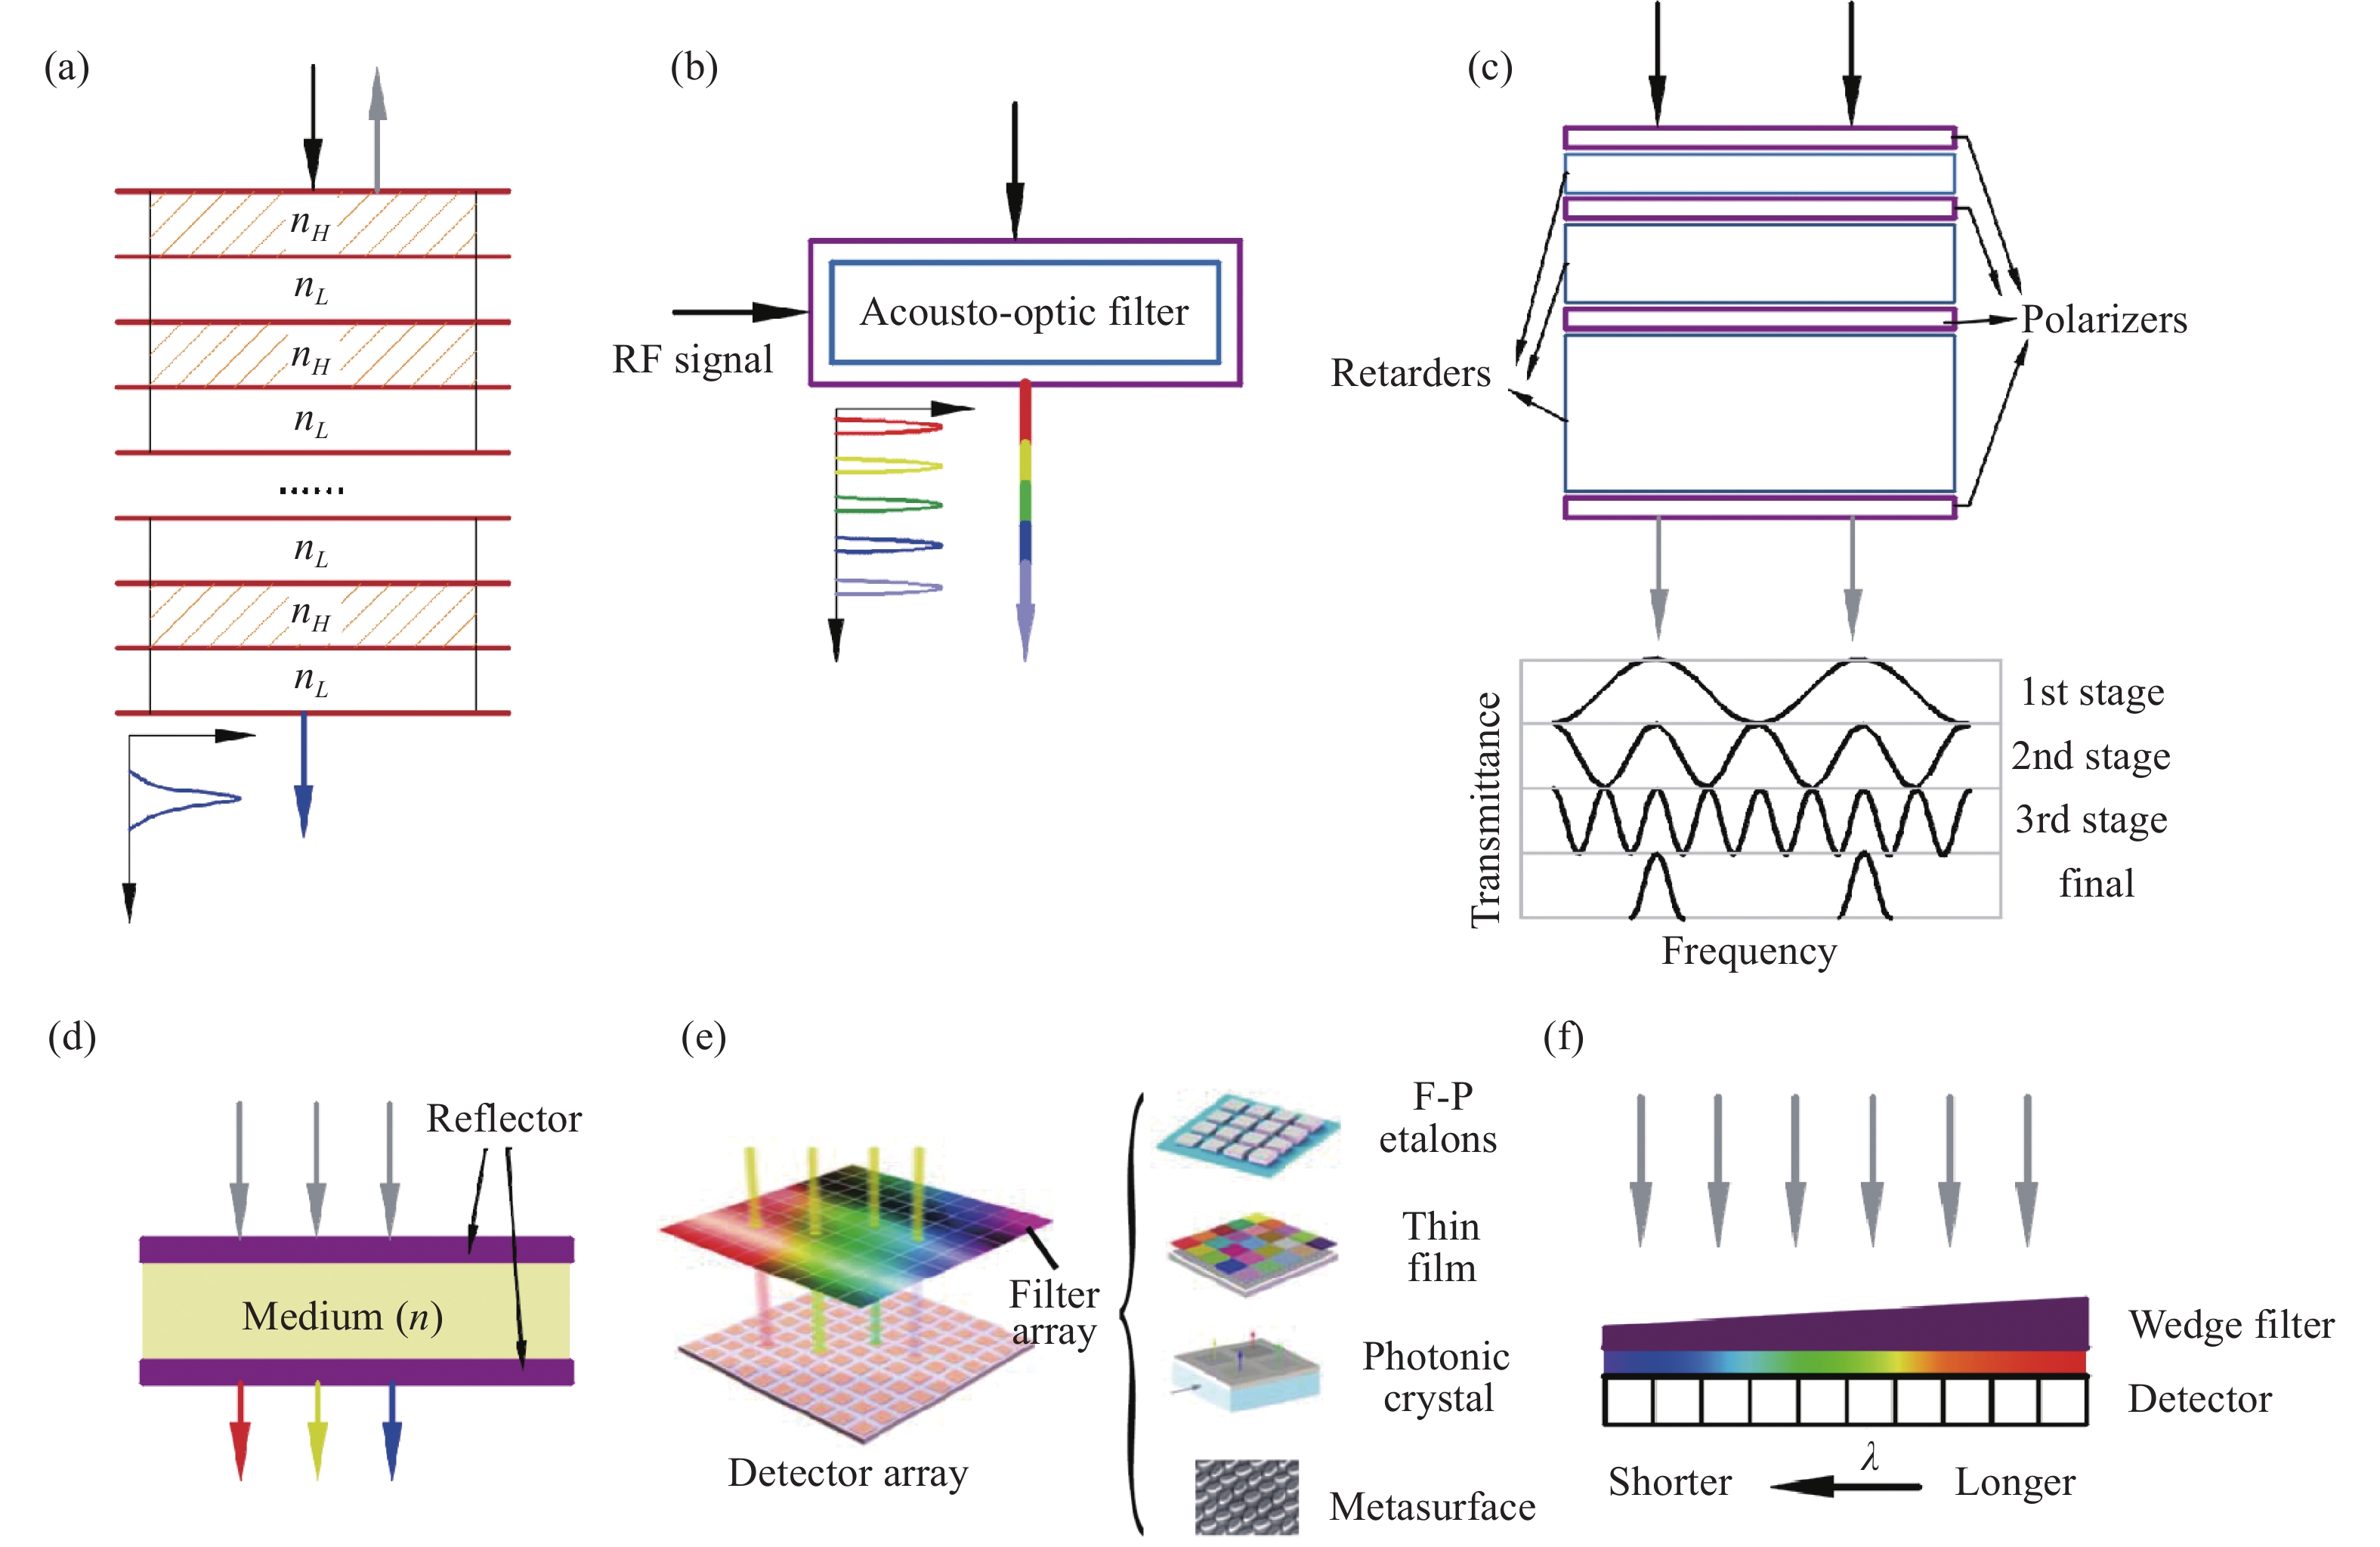 Main principle of filter imaging spectrometers: (a) Interference filter；(b) Acousto-optic tunable filter；(c) Lyot-Ohman liquid crystal birefingent tunable filter；(d) Fabry-Perot etalon；(e) Array filter; (F) Linear variable filter